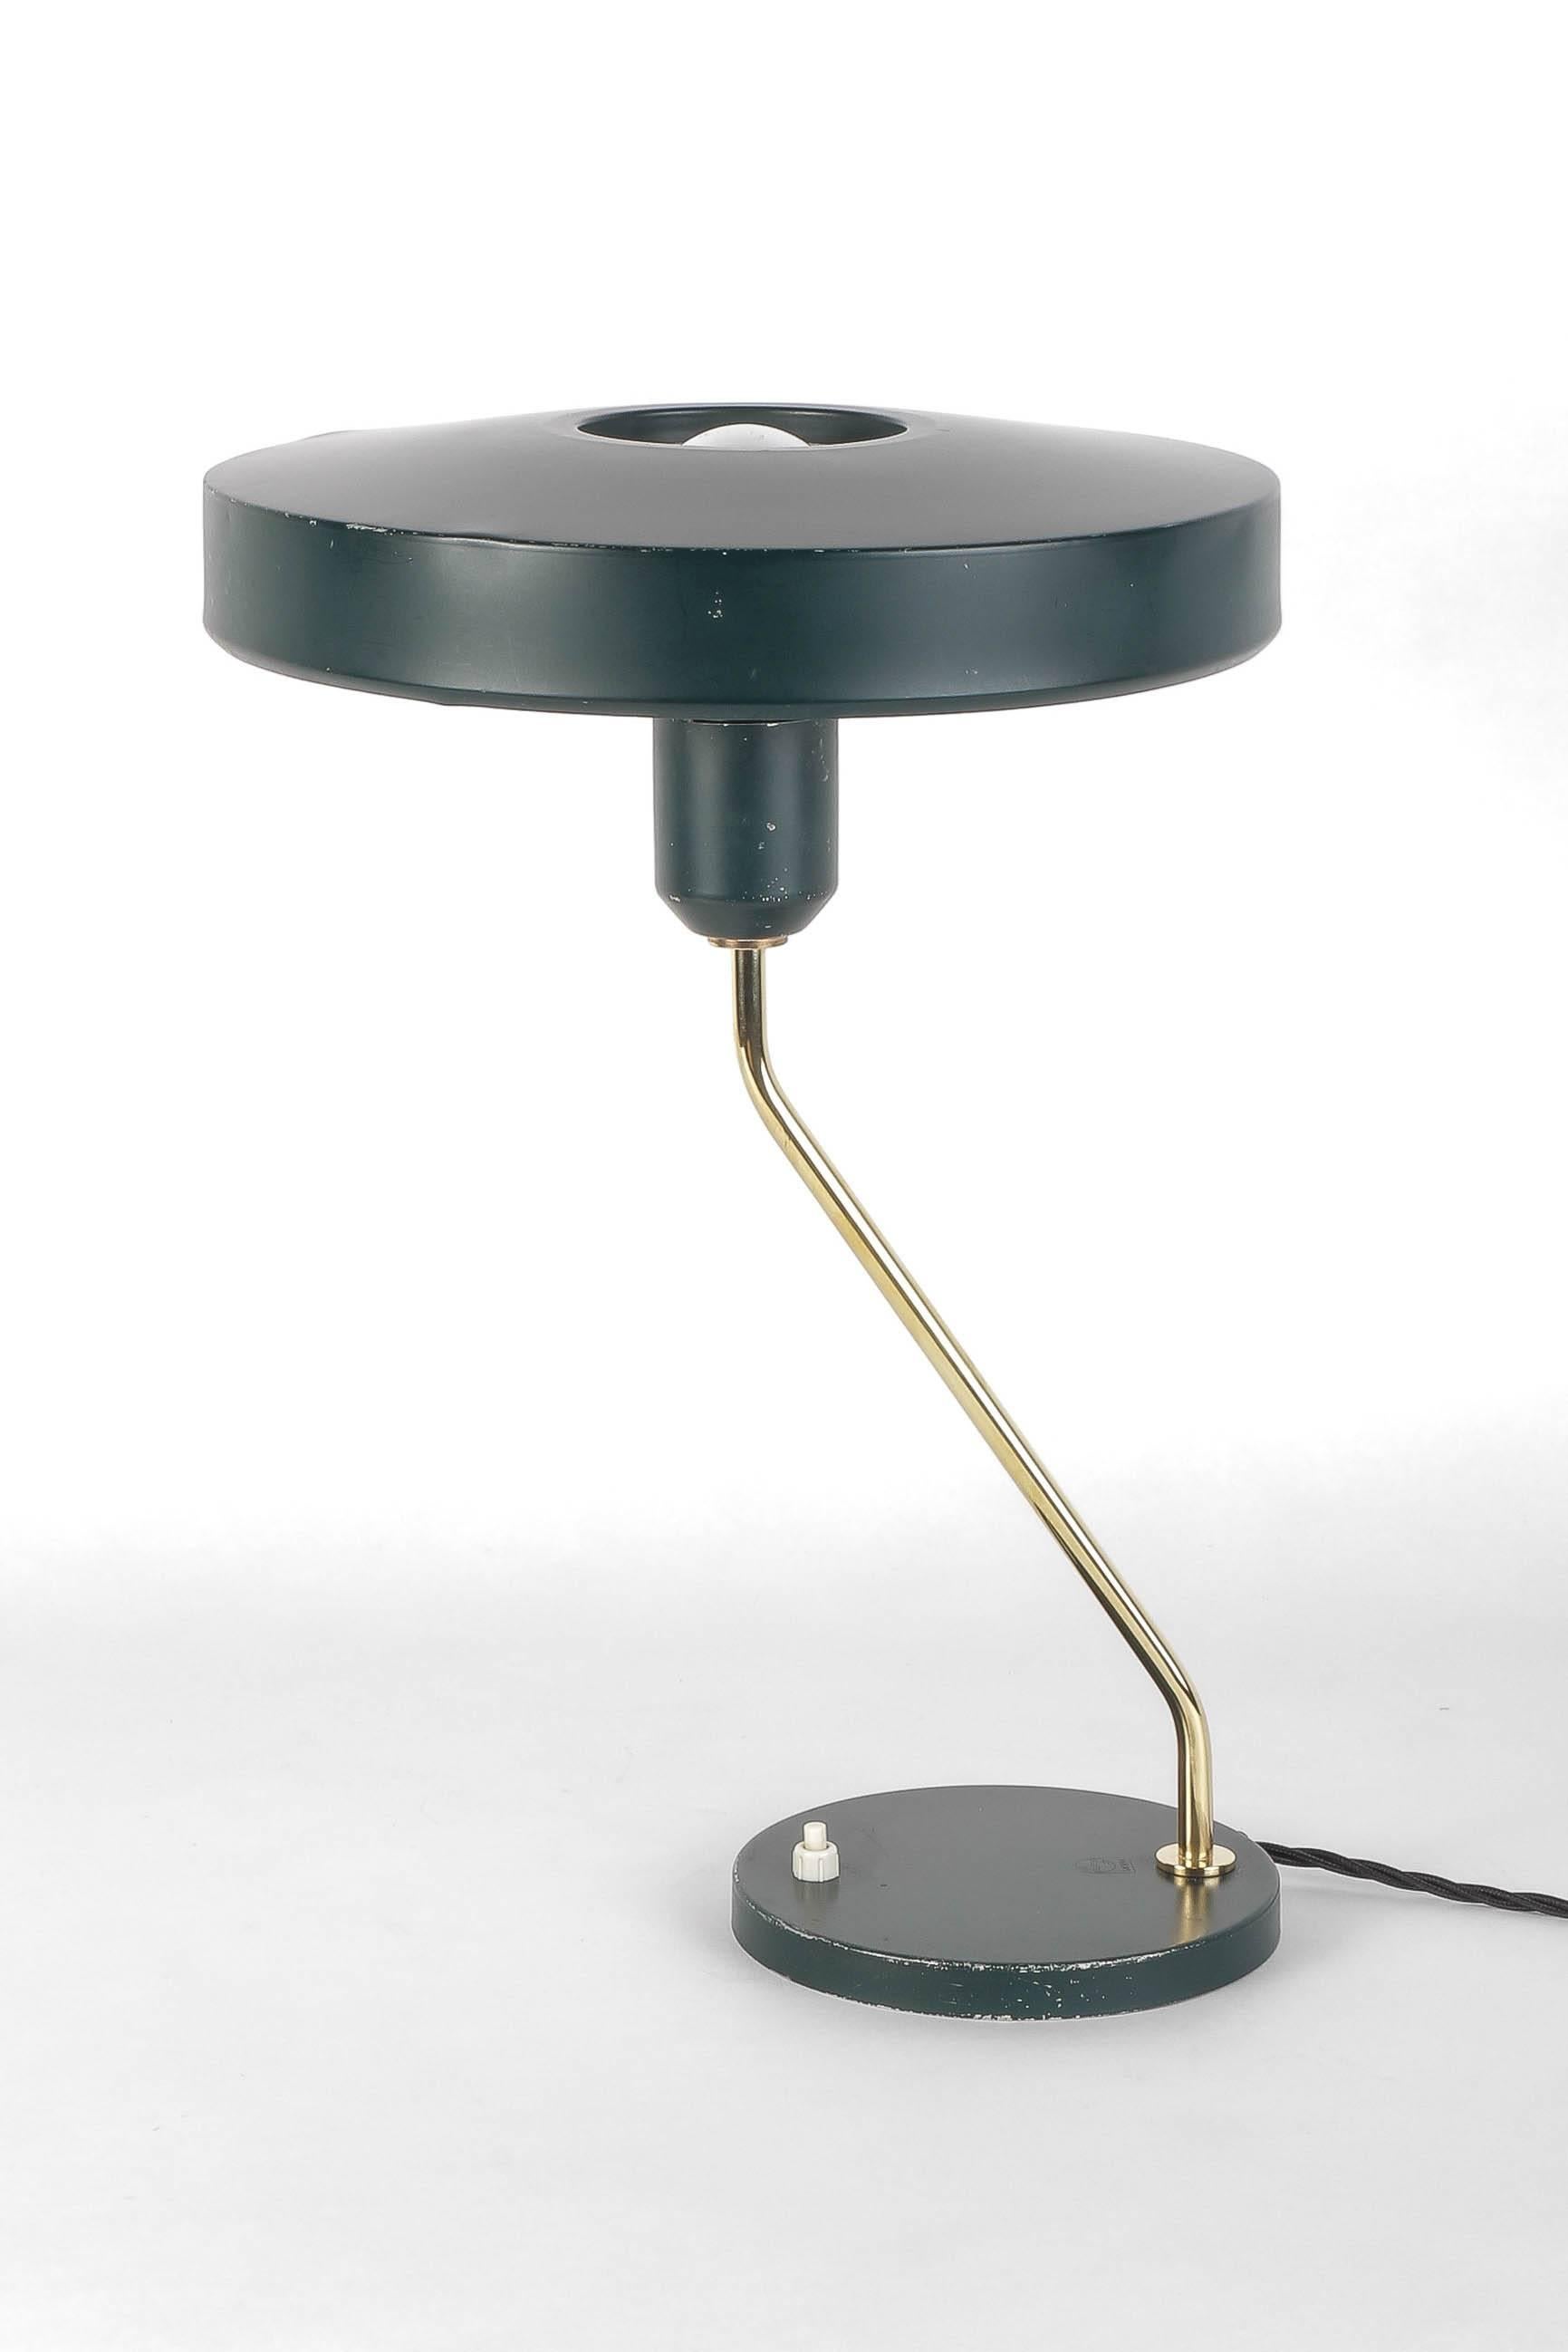 Louis Kalff table lamp model “Z” manufactured by Philips in the Netherlands in the late 1950s. Dark green original color with a fine brass stems and recently polished.